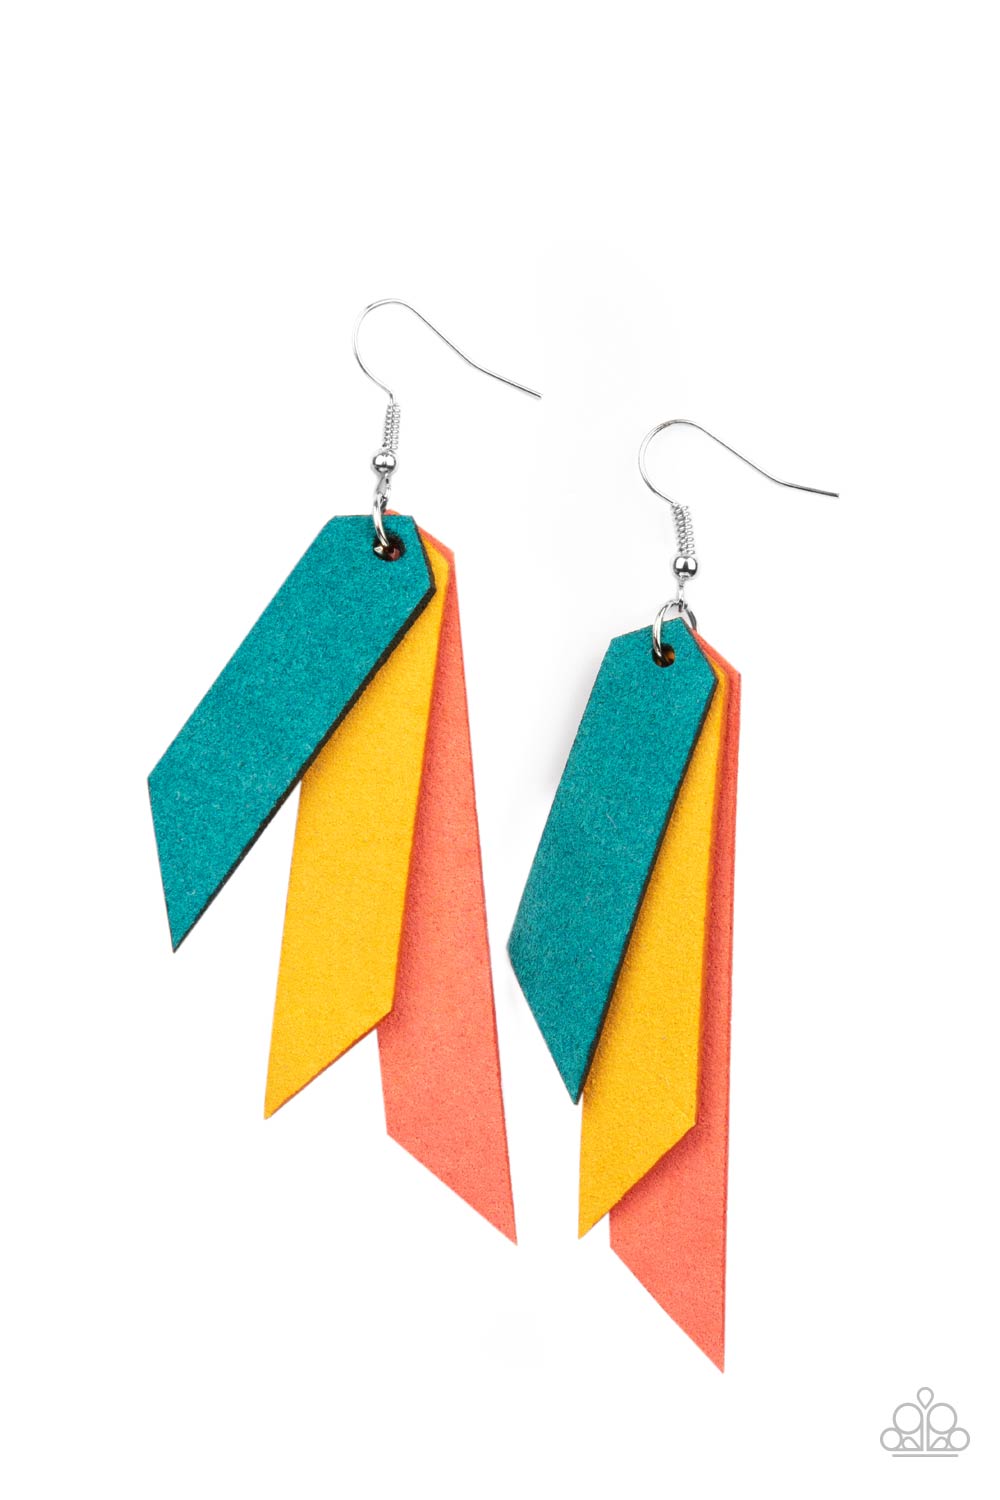 Suede Shade - Mult Blue, Coral Orange & Yellow Earrings - Princess Glam Shop